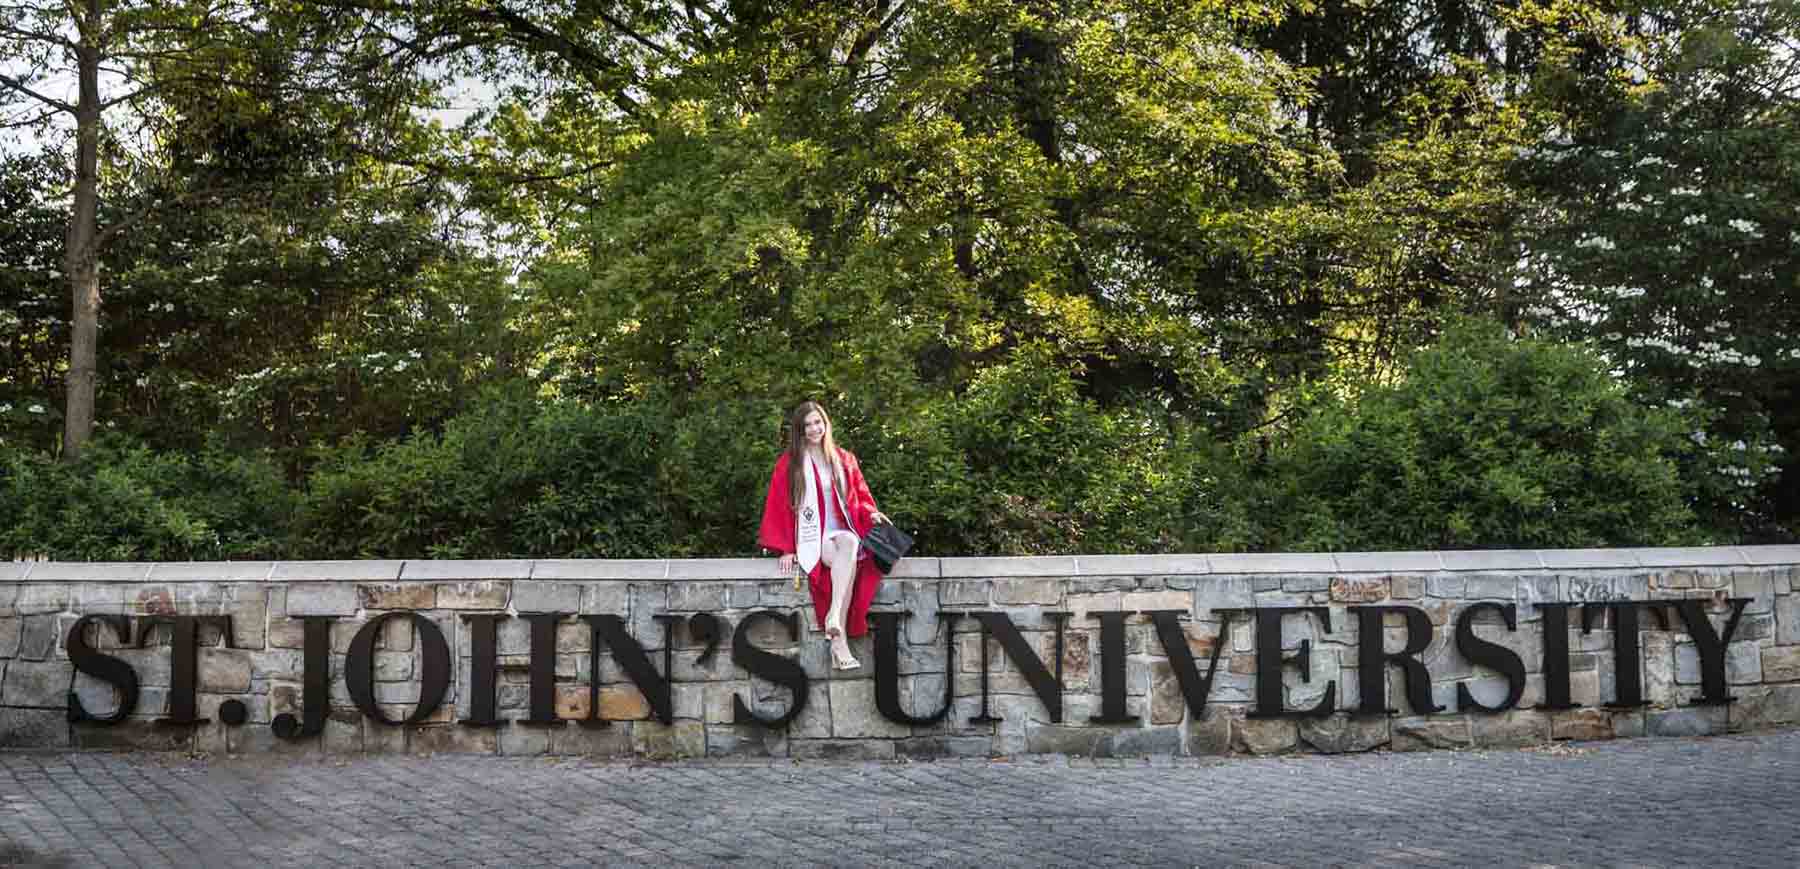 Female graduate wearing red robe and white sashes sitting on sign during a St. John’s University graduate portrait session